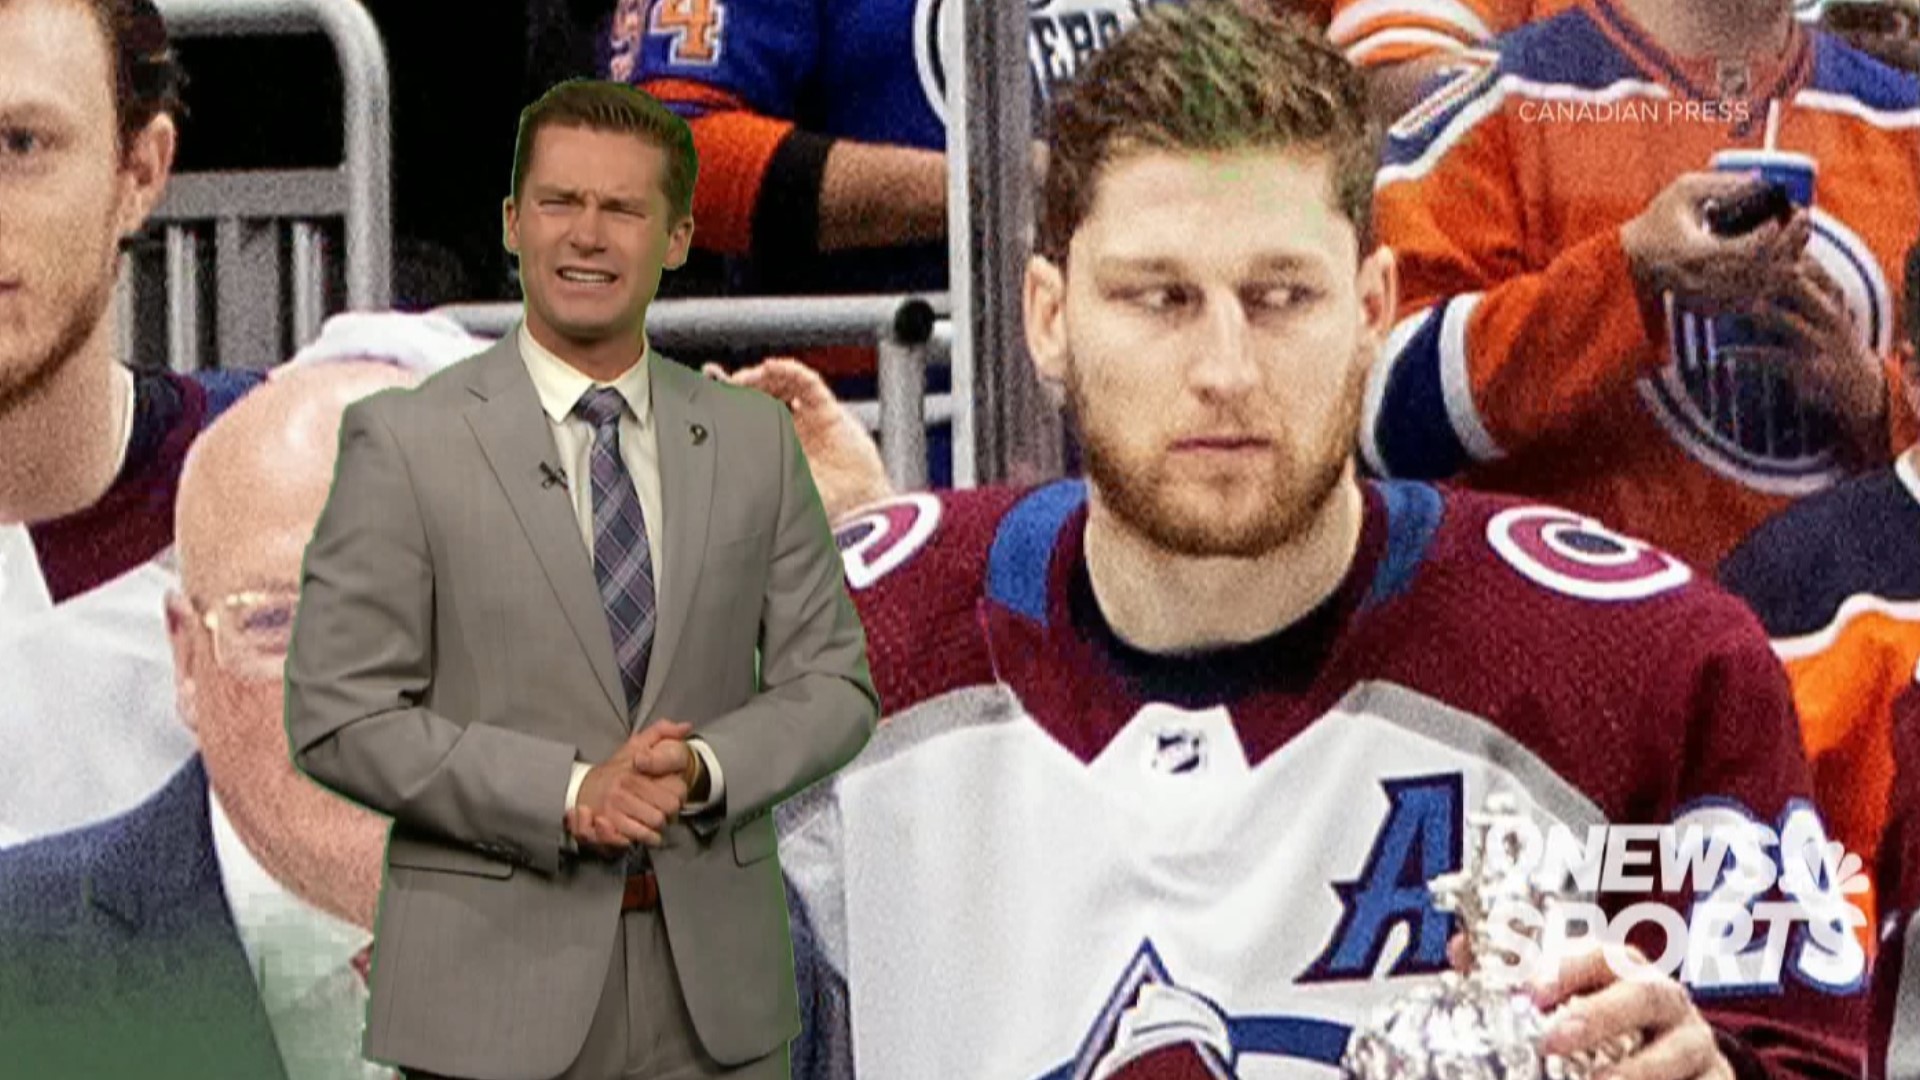 Scotty Gange takes a look at how the Colorado Avalanche were torn about touching the Campbell Trophy after winning the Western Conference Finals.